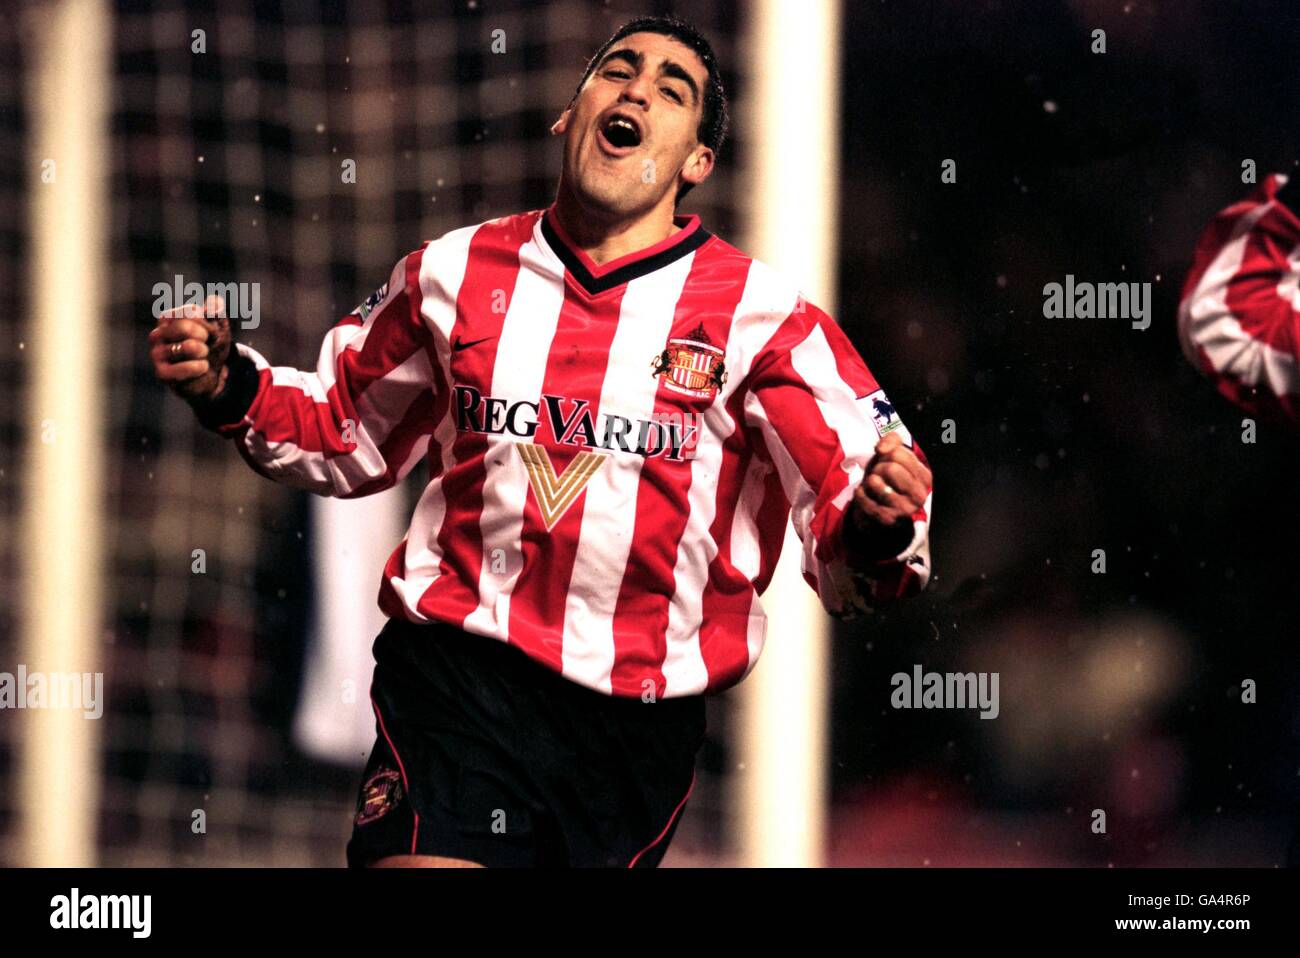 Sunderland's Claudio Reyna celebrates after scoring the winning goal in his home debut against Everton Stock Photo